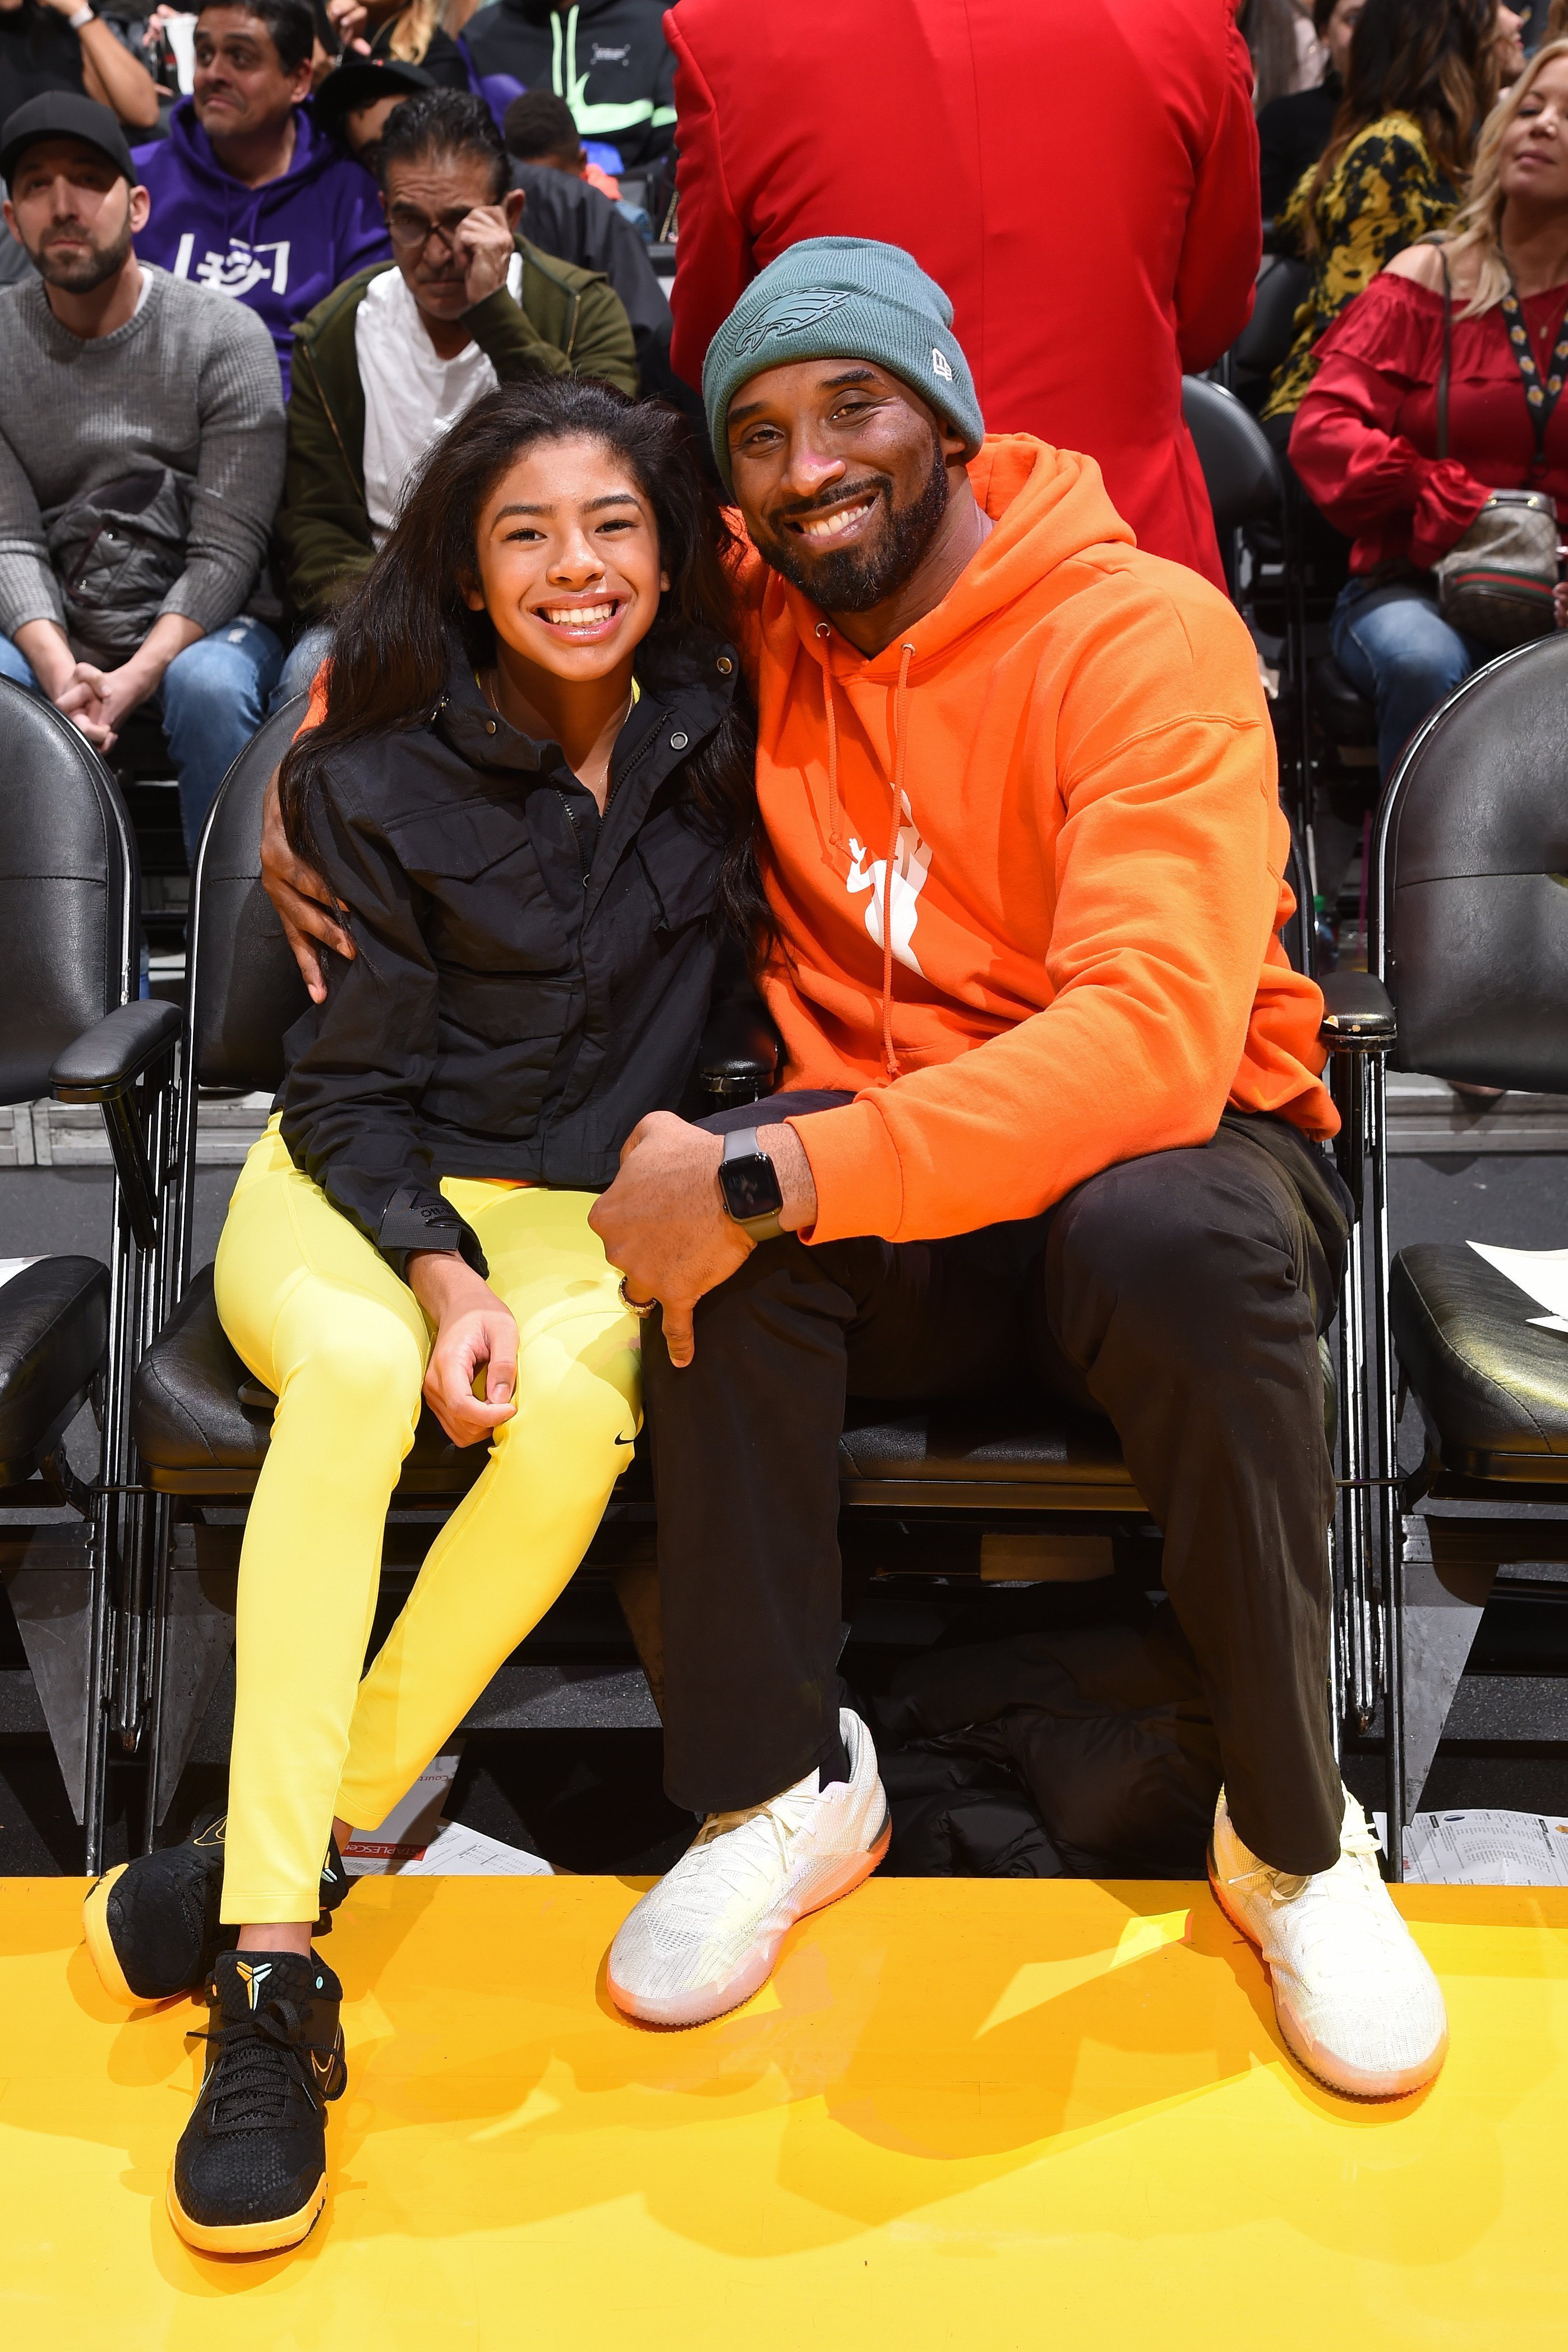 Kobe Bryant & Gianna Bryant at the game between the Los Angeles Lakers and the Dallas Mavericks on Dec. 29, 2019 in California | Photo: Getty Images